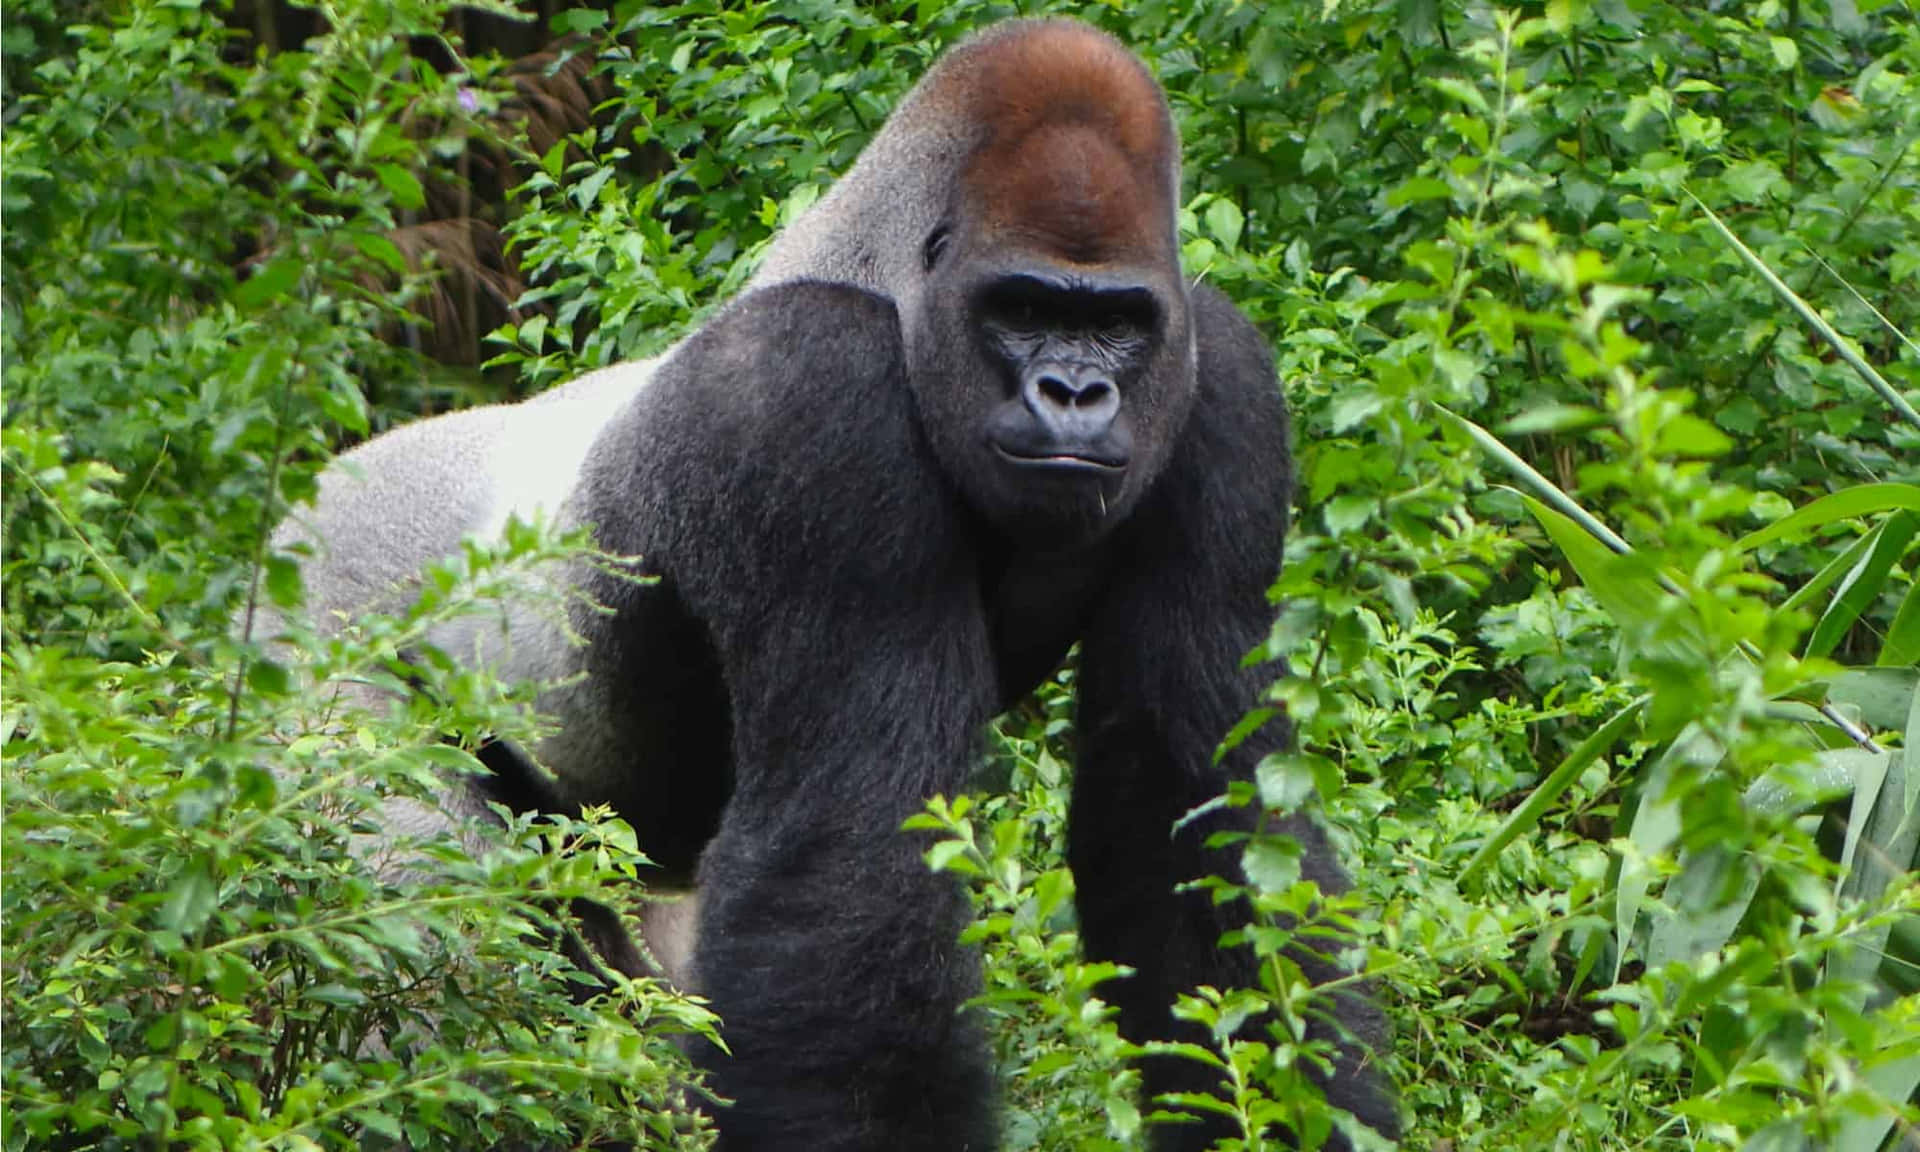 A gorilla stands in a peaceful, lush rainforest environment.